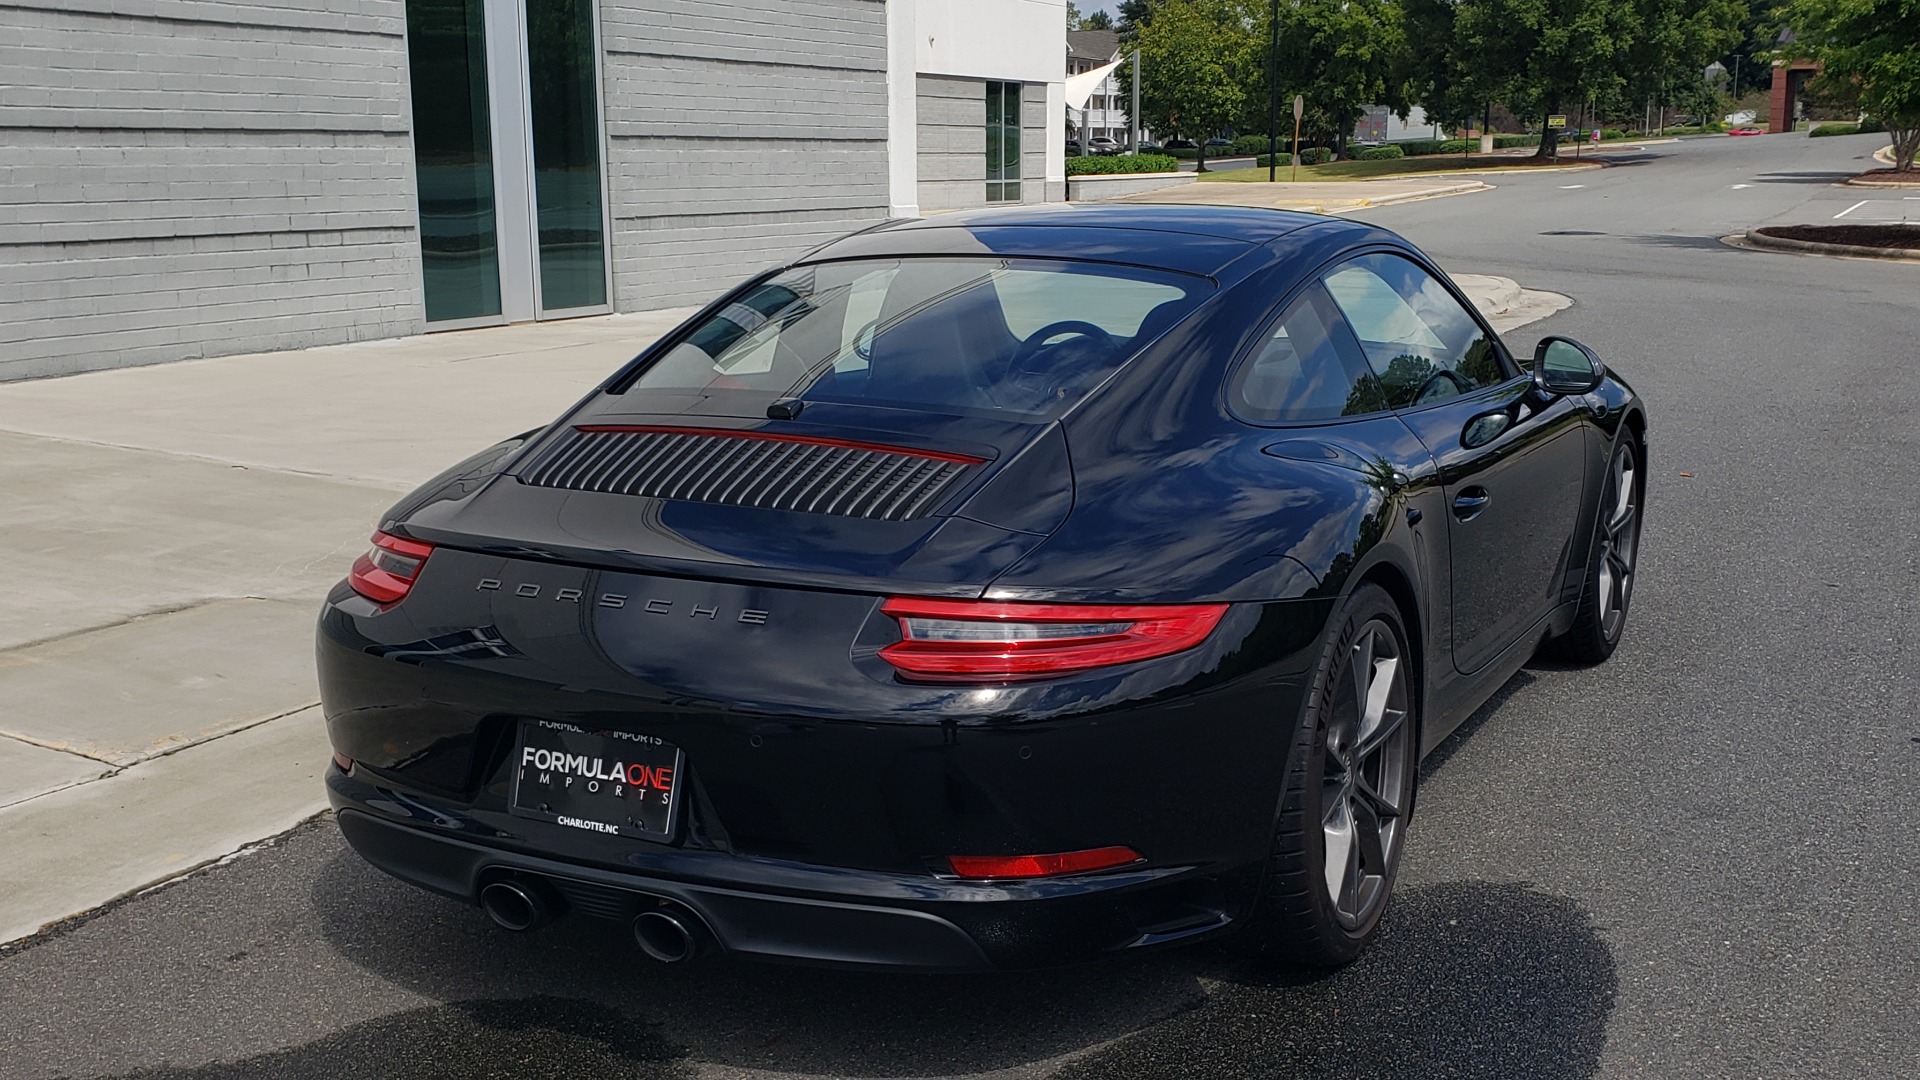 Used 2019 Porsche 911 CARRERA T / 3.0L H6 / MANUAL / PREMIUM / NAV / BOSE / SUNROOF / REARVIEW for sale Sold at Formula Imports in Charlotte NC 28227 3